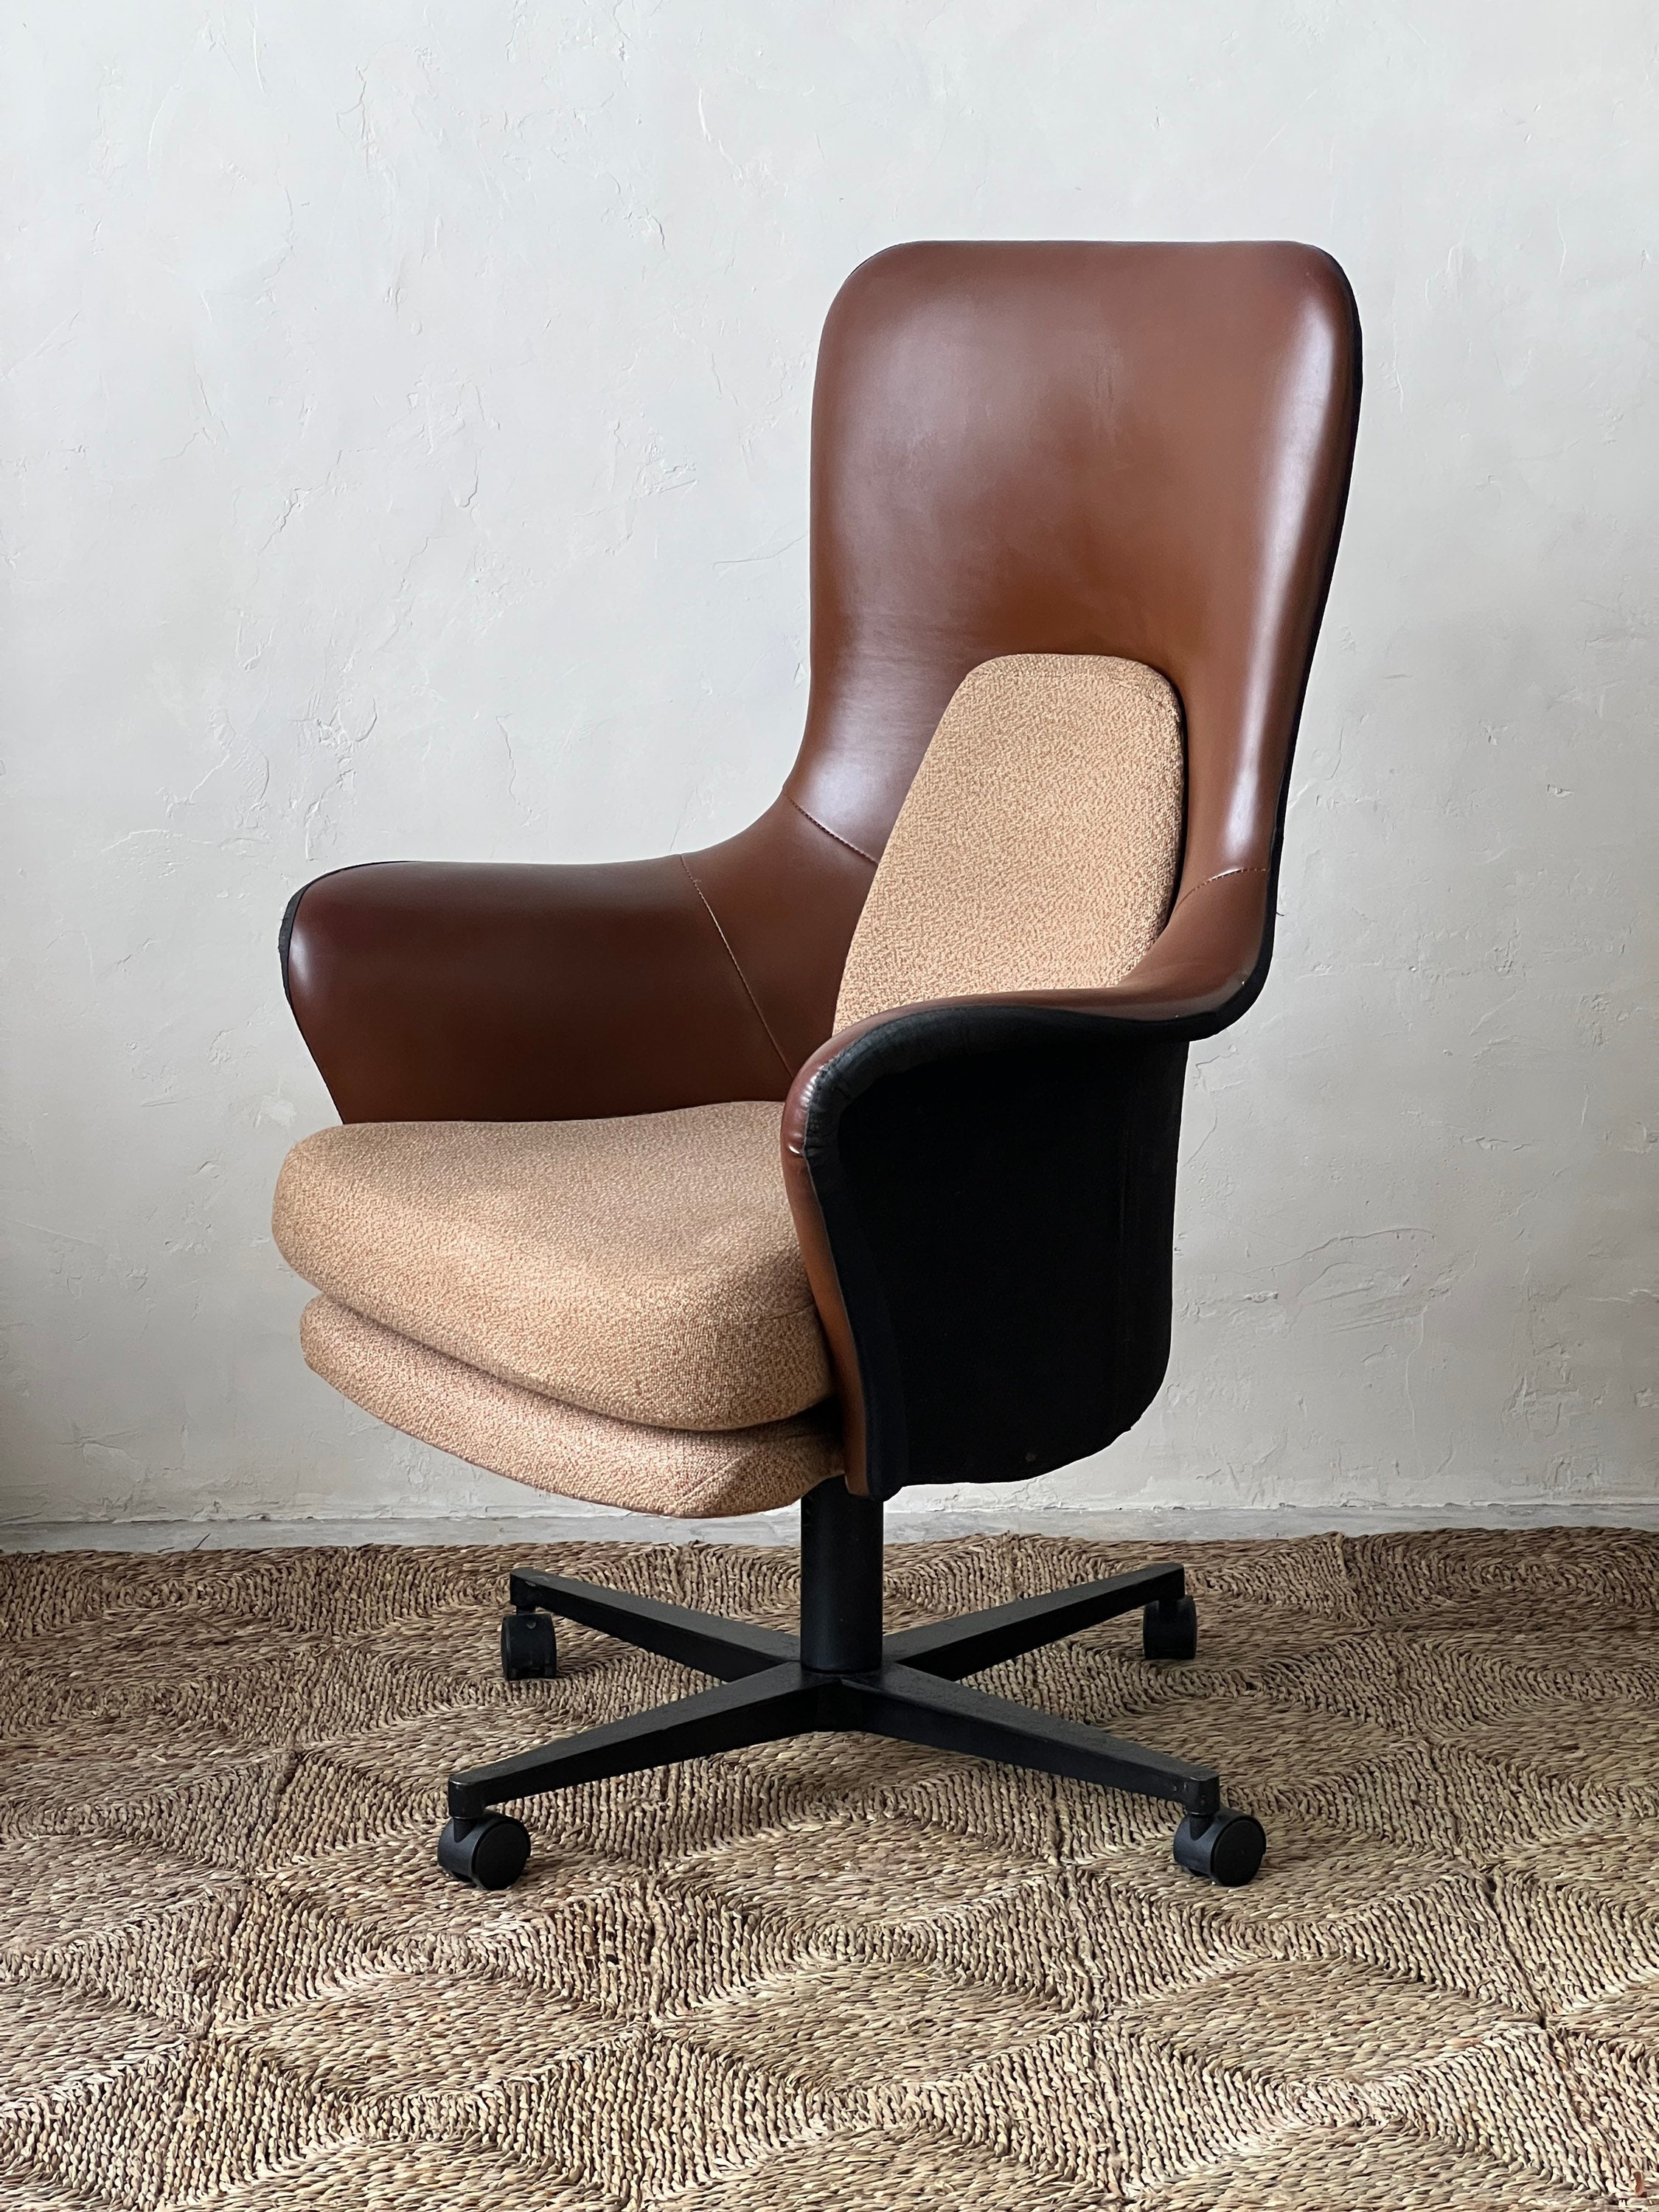 60s Office Chair - Etsy